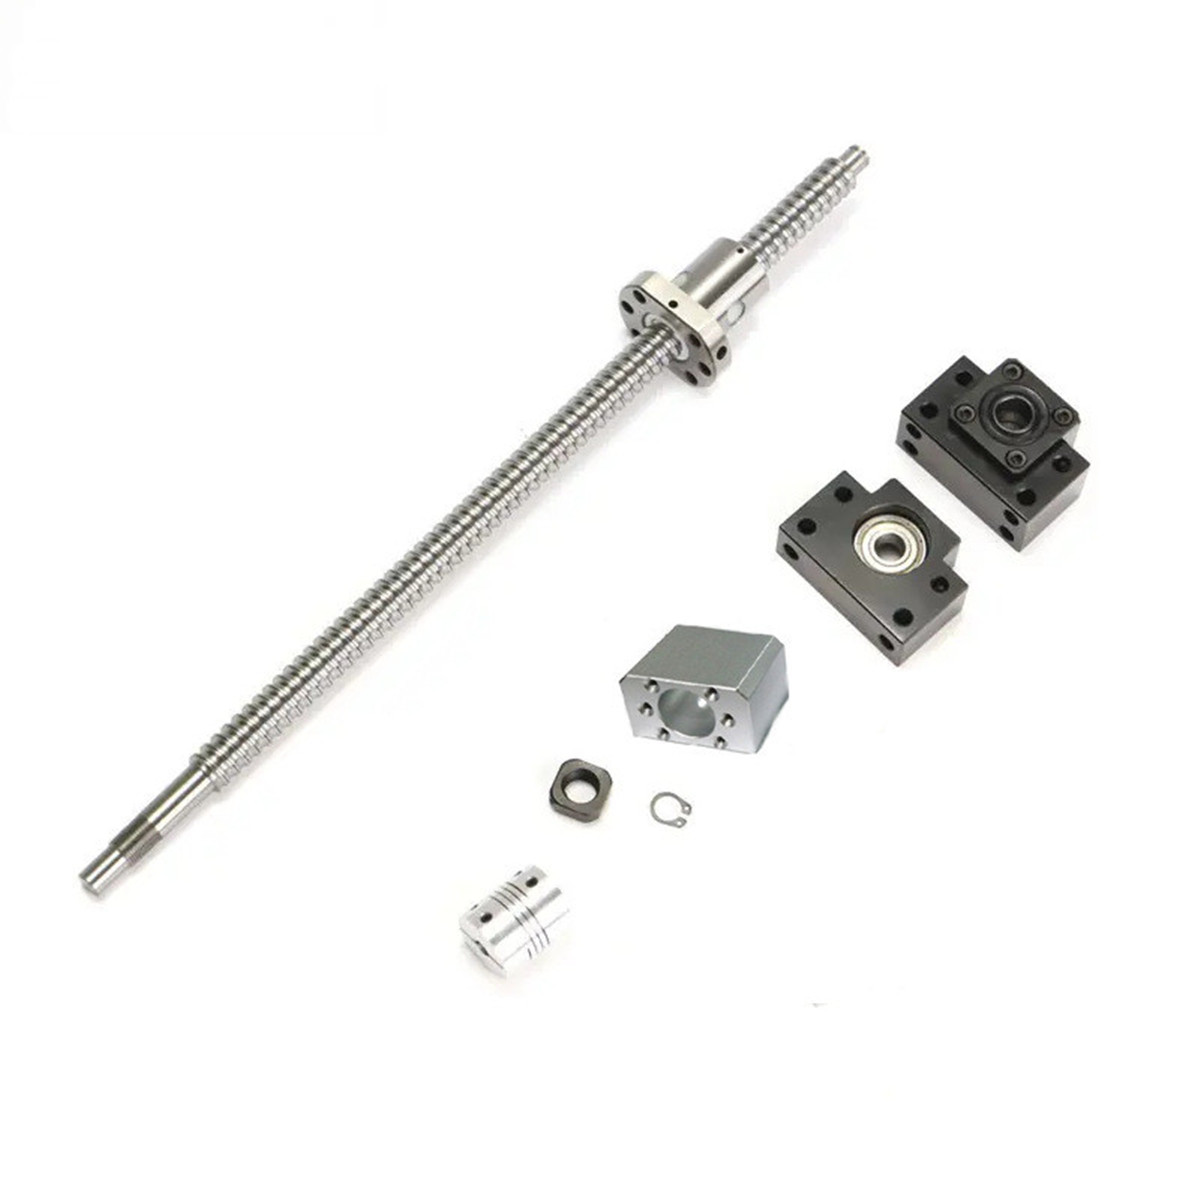 Machifit-SFU1204-300-650mm-Ball-Screw-with-BK-BF10-End-Supports-635x8mm-Coupler-for-CNC-1916612-2